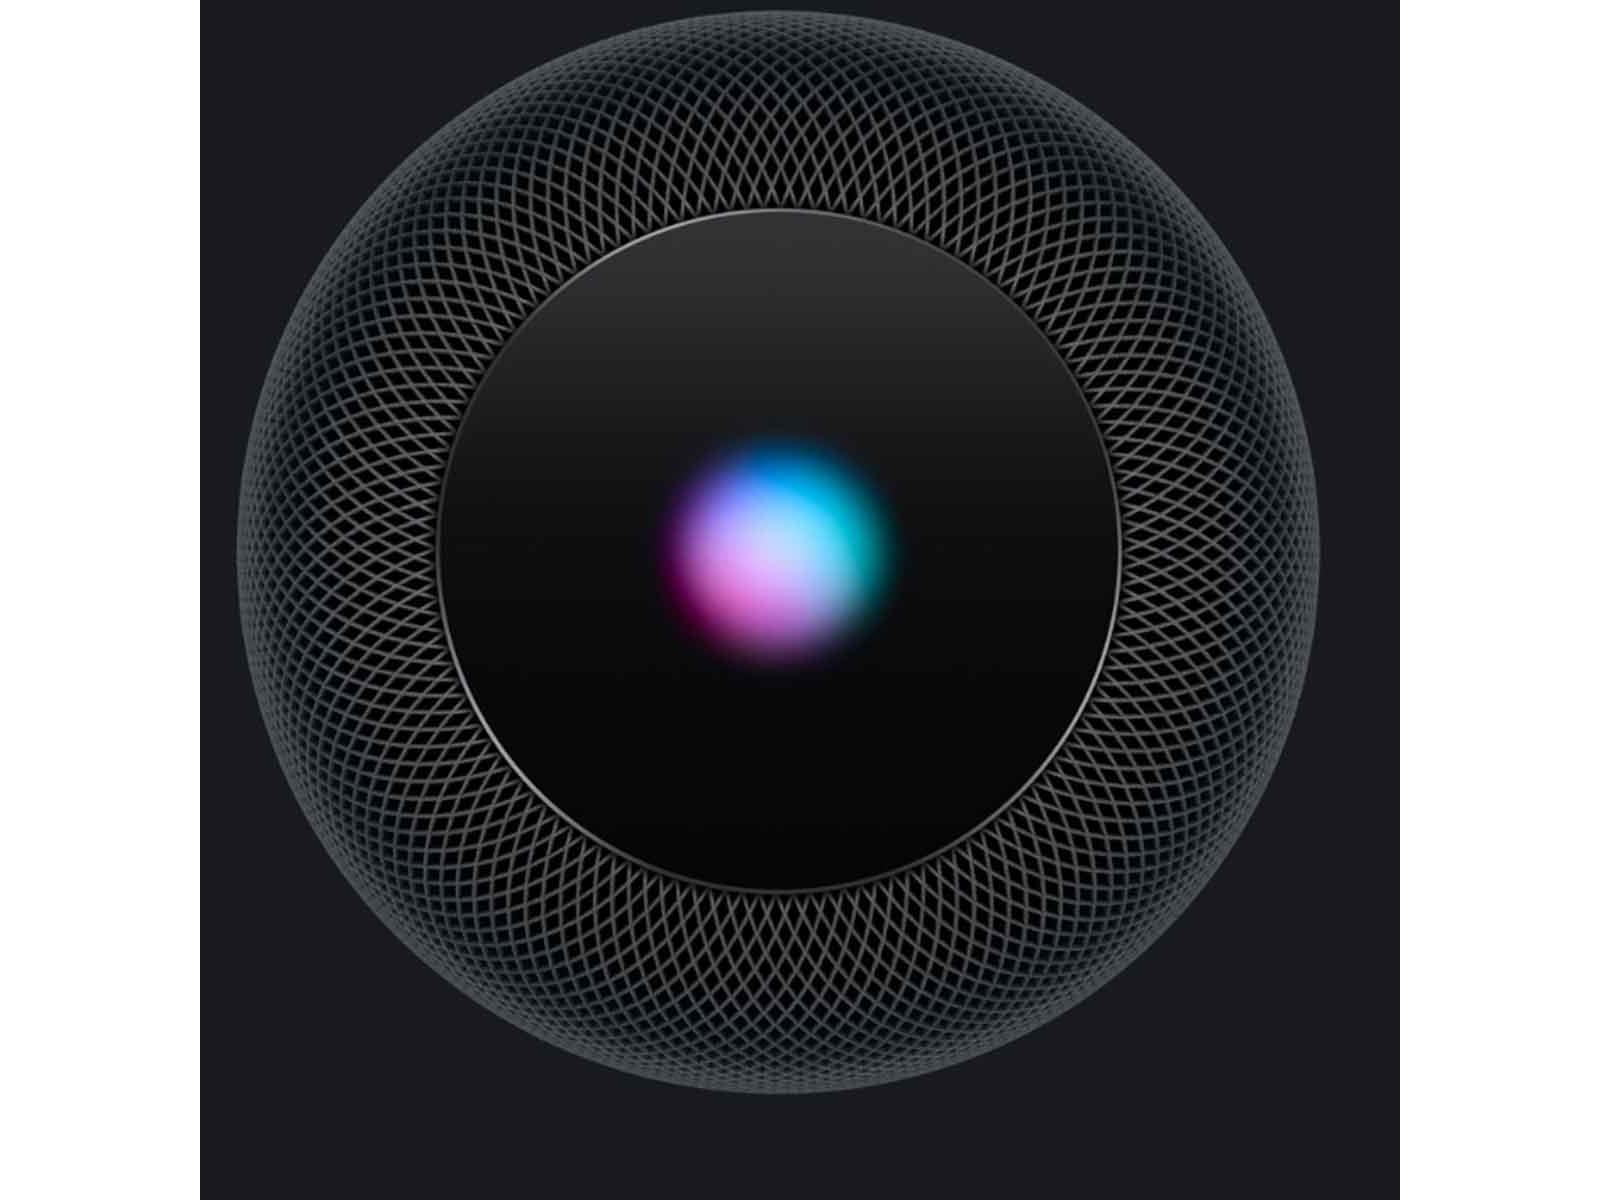 Apple Contractors Reportedly Listened To Over 1 000 Siri Recordings Per Shift Hothardware